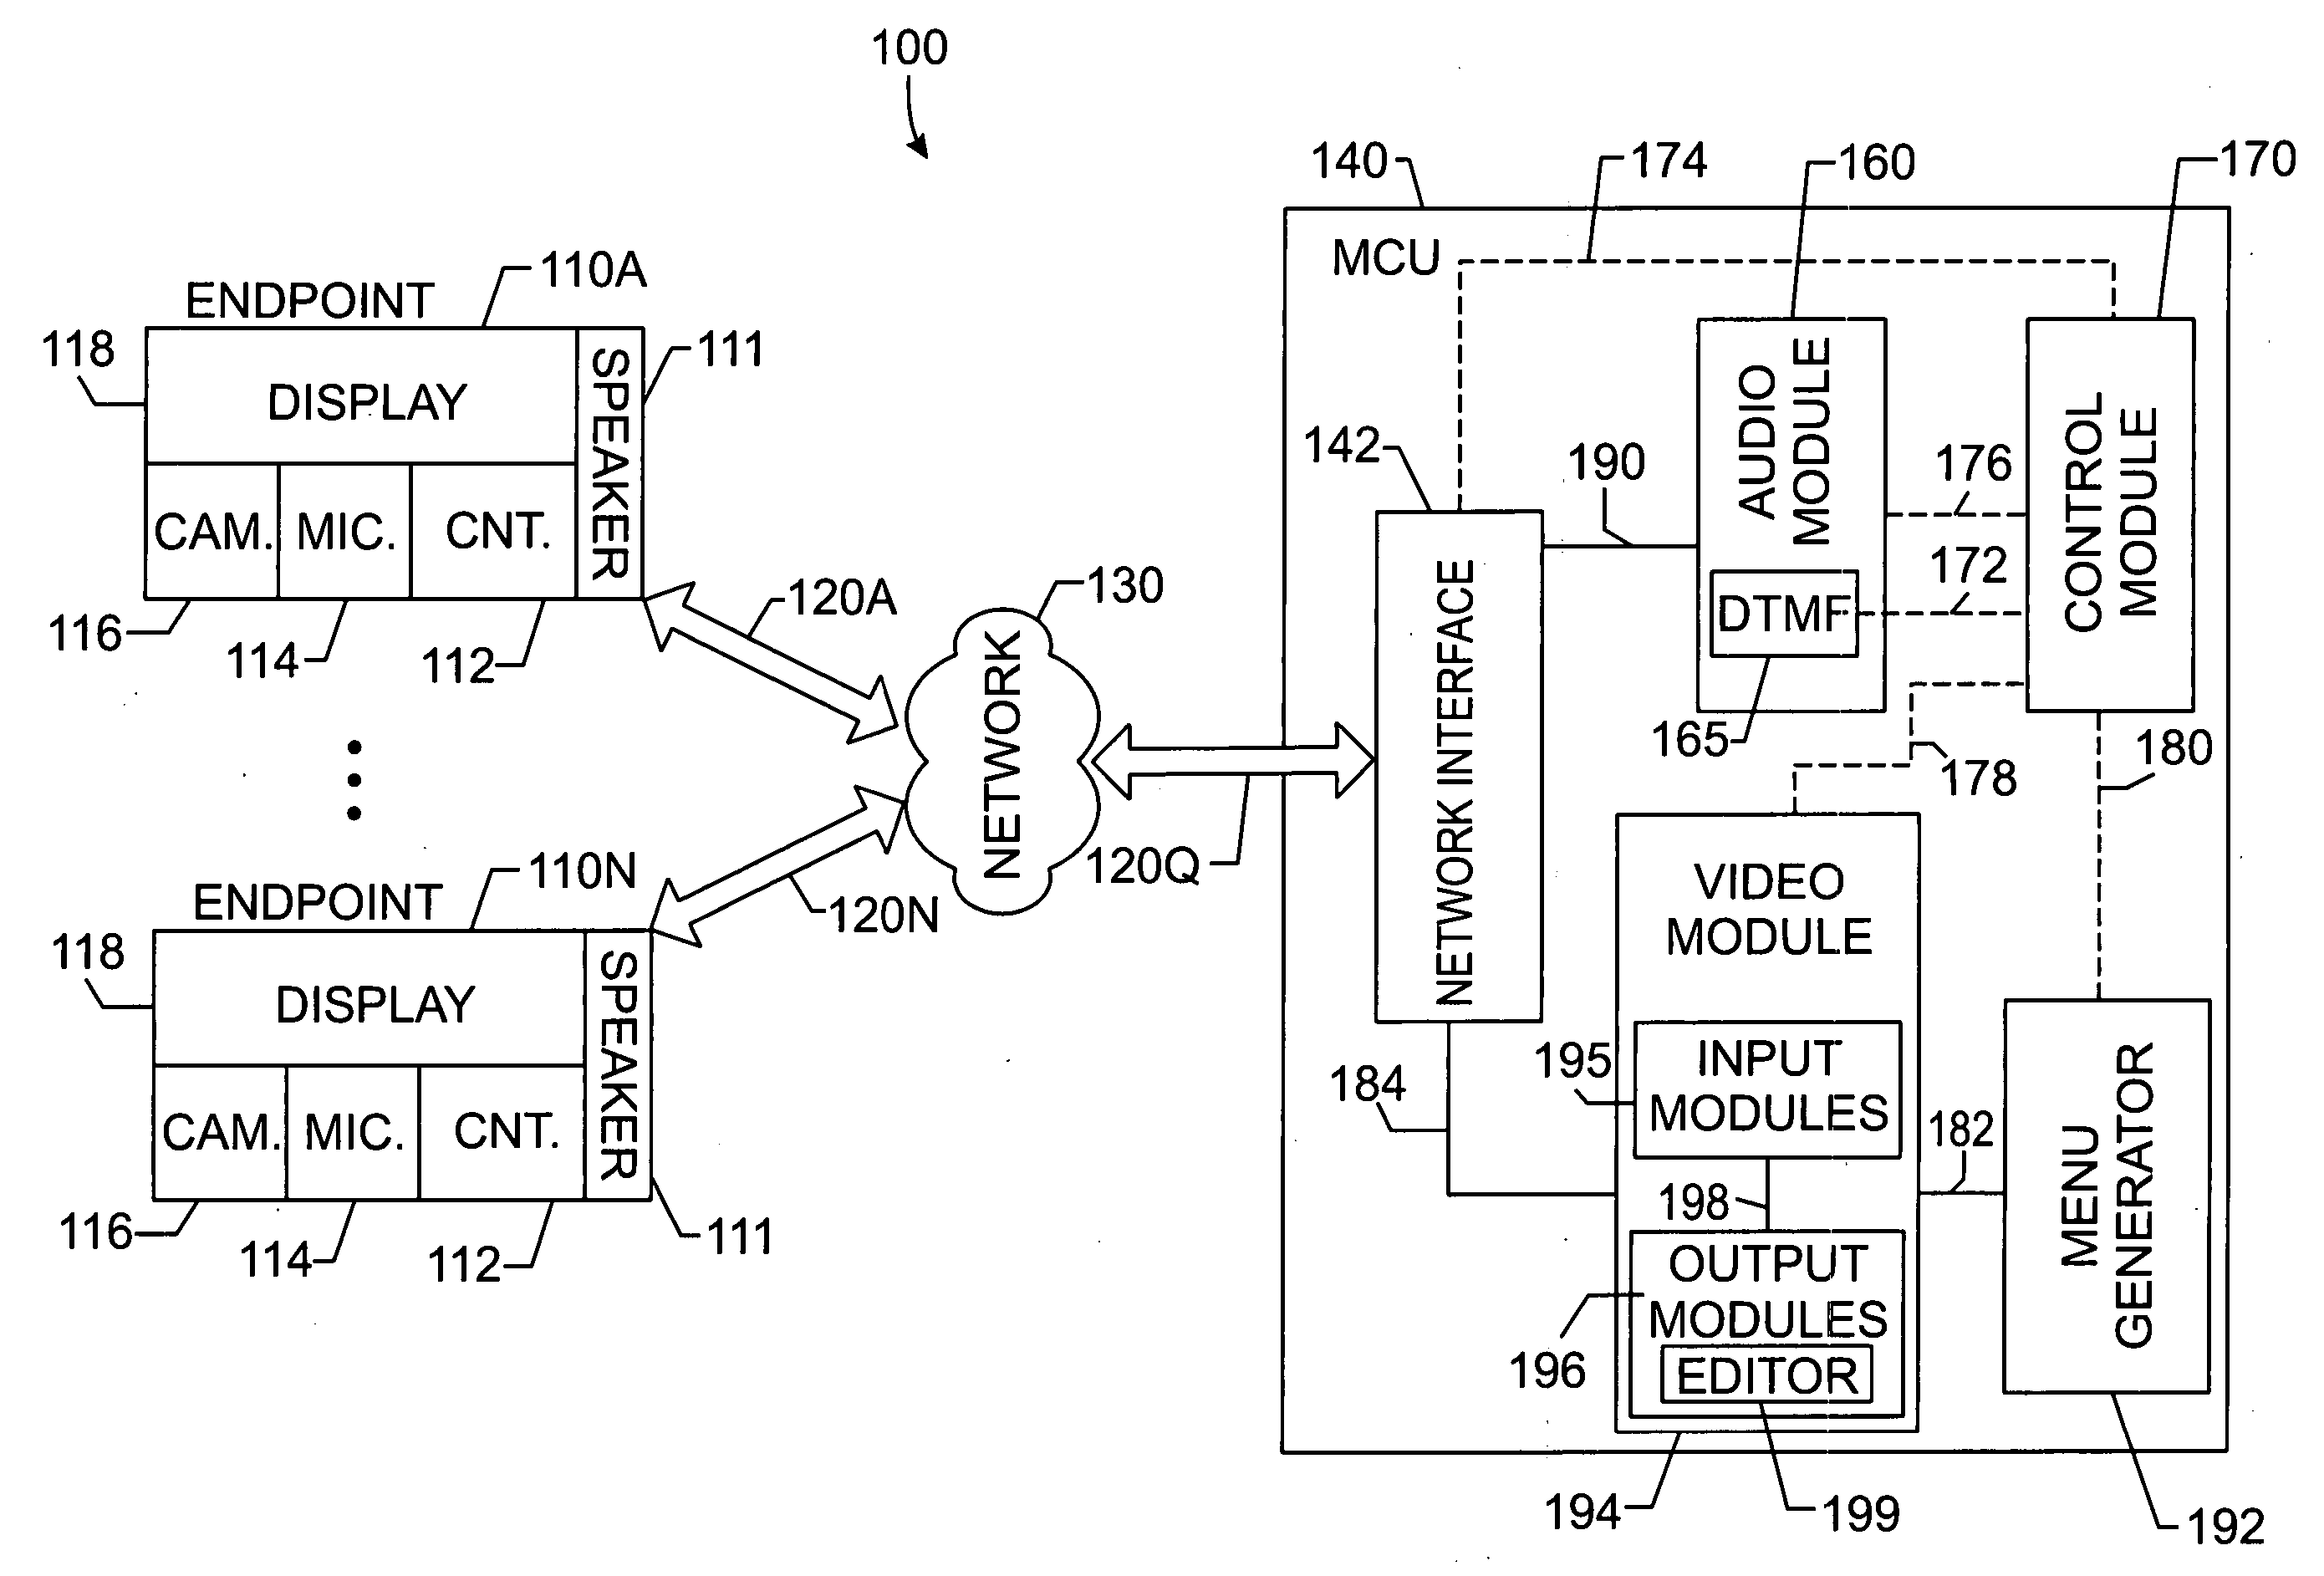 Method and system for conducting a sub-videoconference from a main videoconference